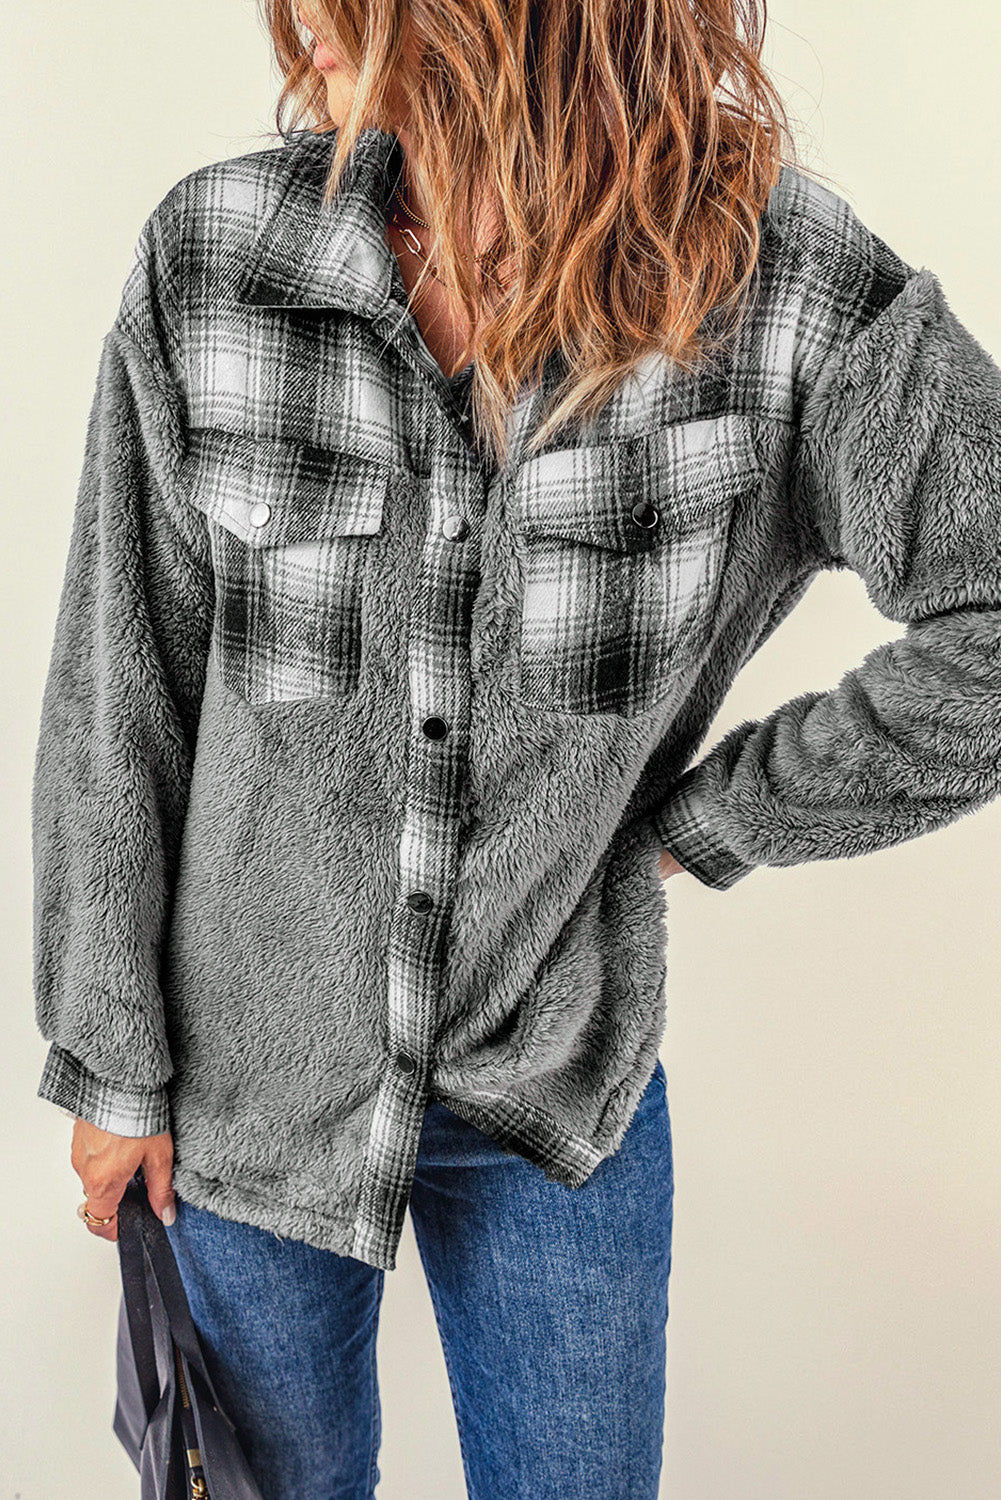 Casual Gray Plaid Patchwork Buttoned Pocket Sherpa Jacket